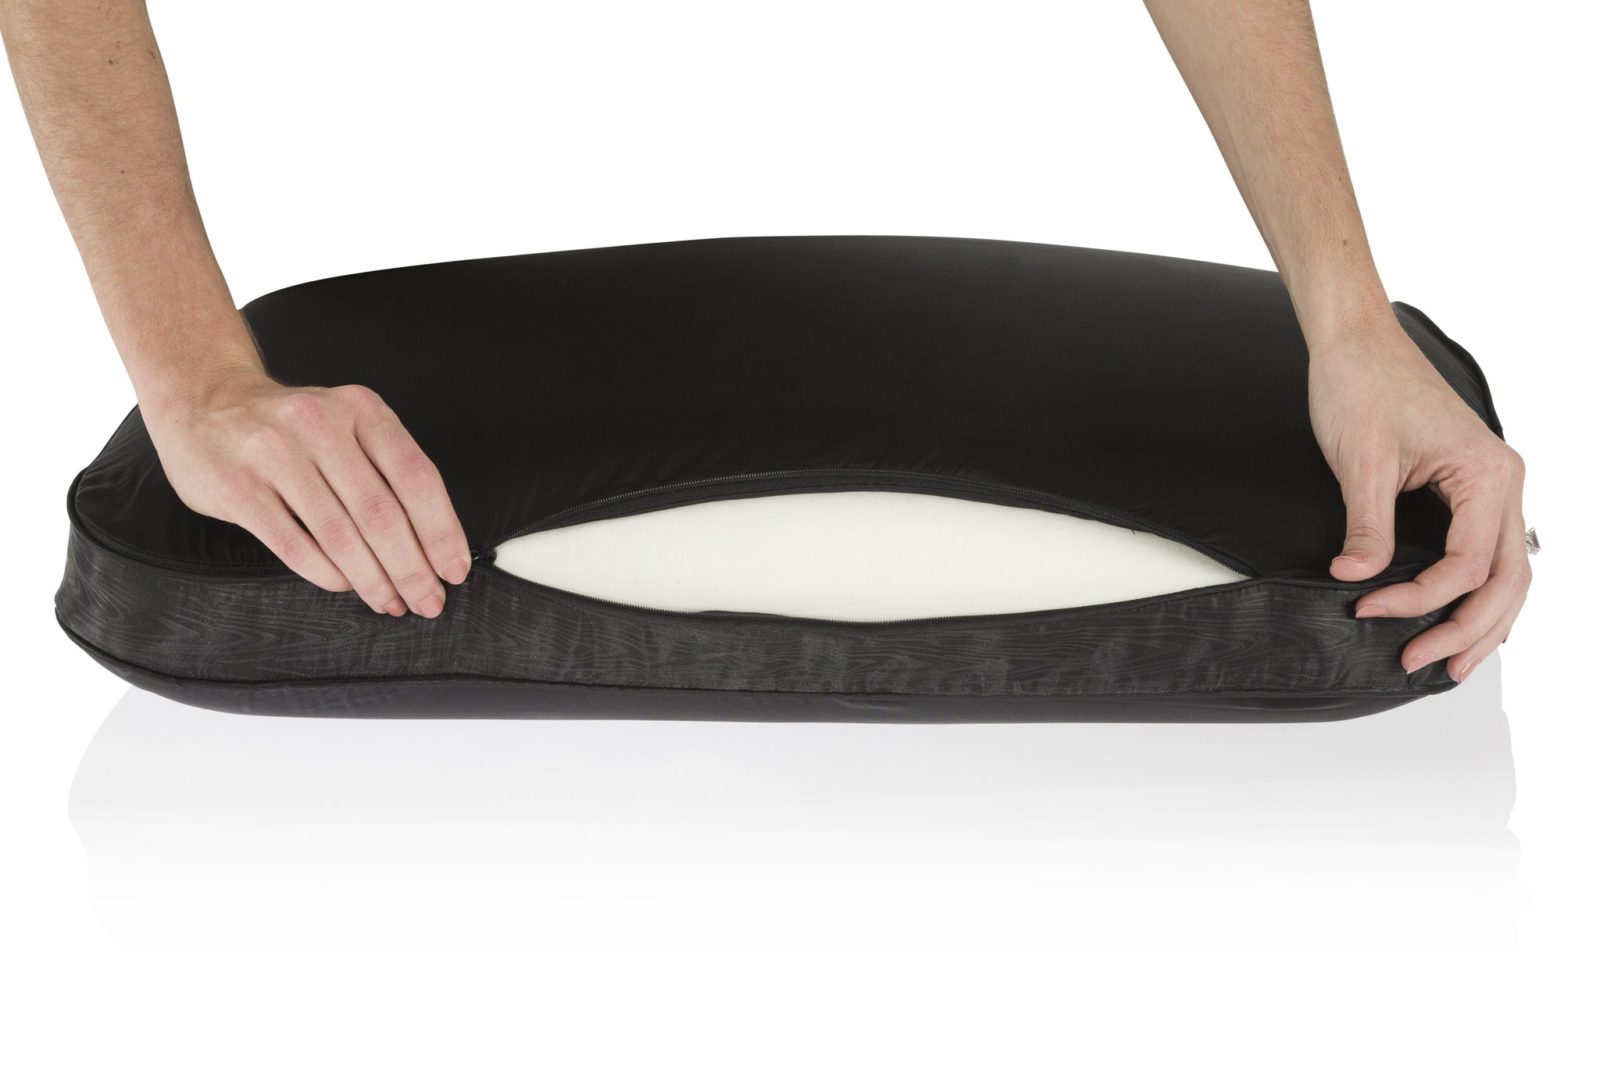 My Favorite Bed Pillows for a Good Night's Sleep